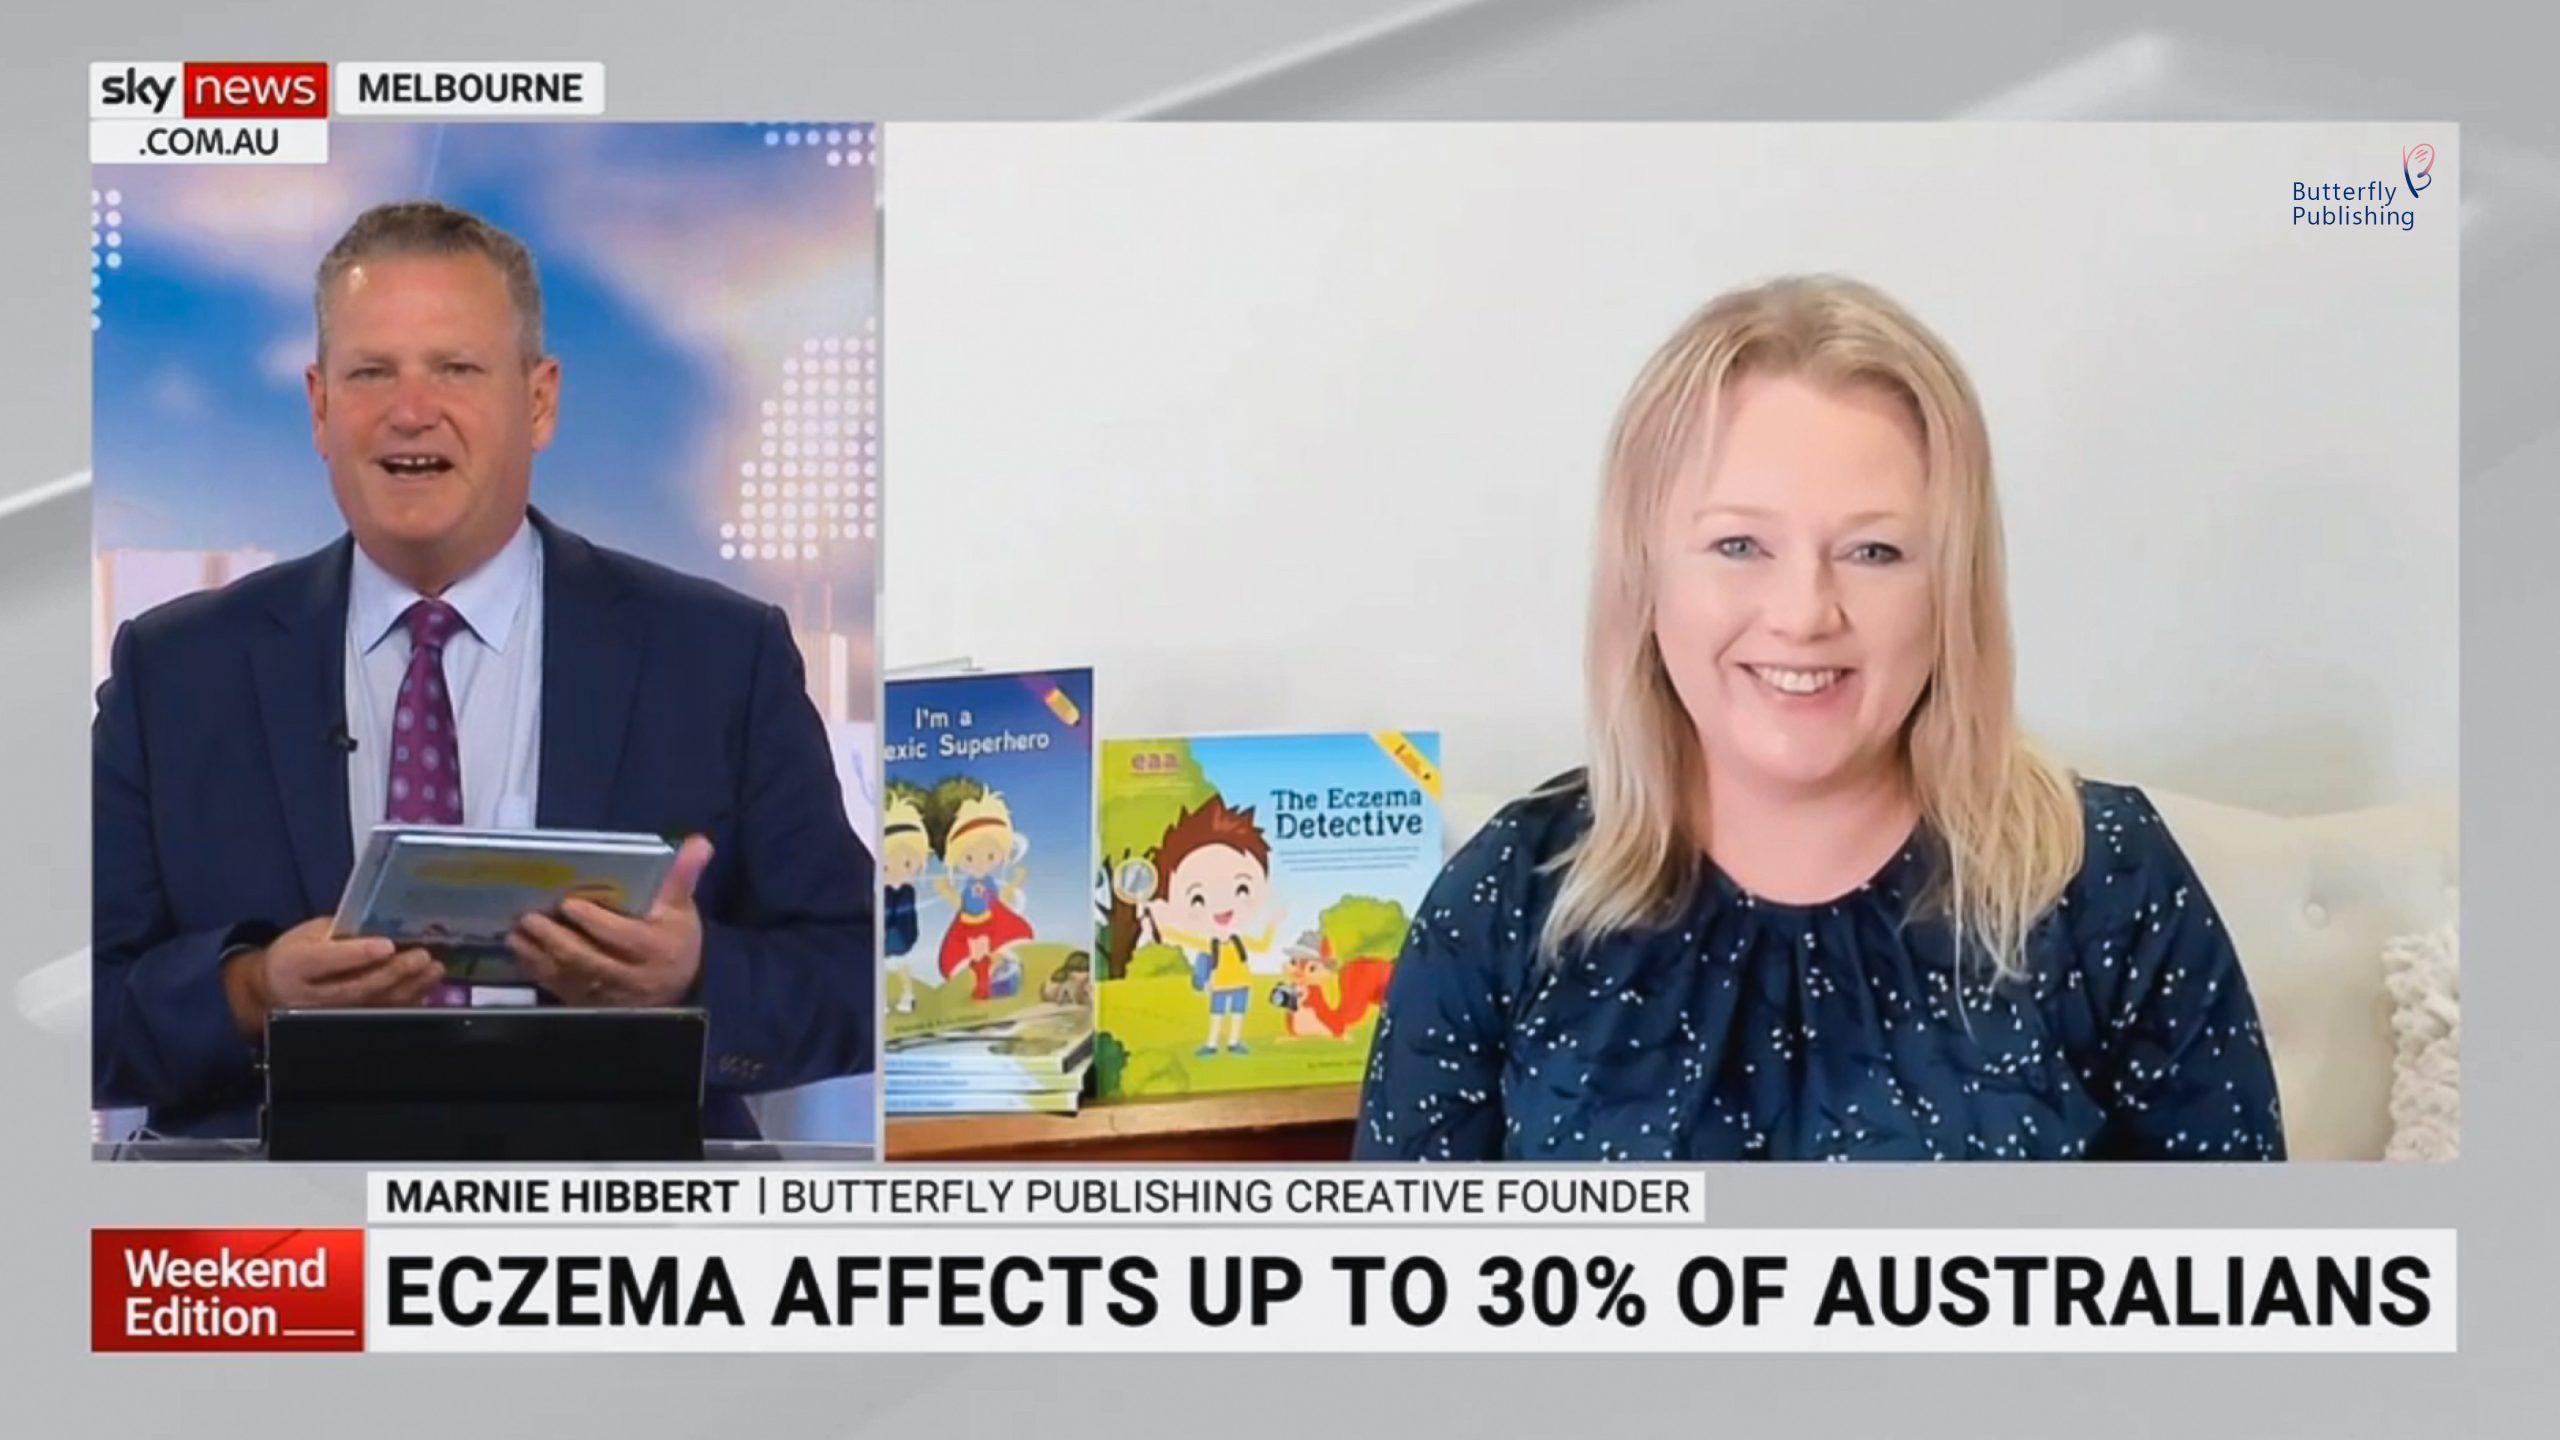 Our latest book ‘The Eczema Detective’ on Sky News!